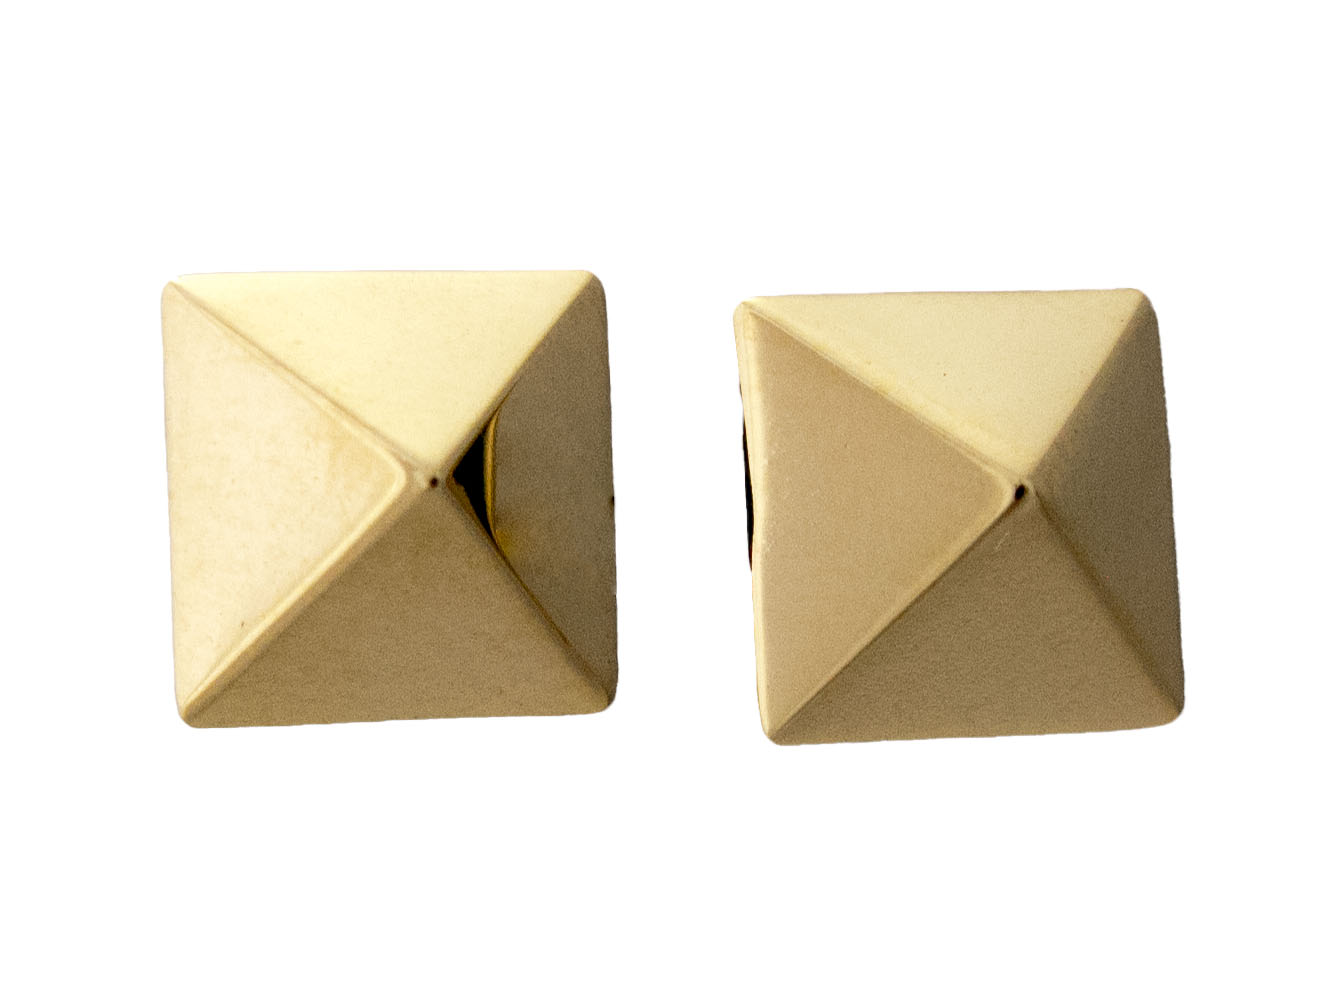 14k Gold Pyramid Studs, 8mm square spiked earrings in yellow, white or rose gold